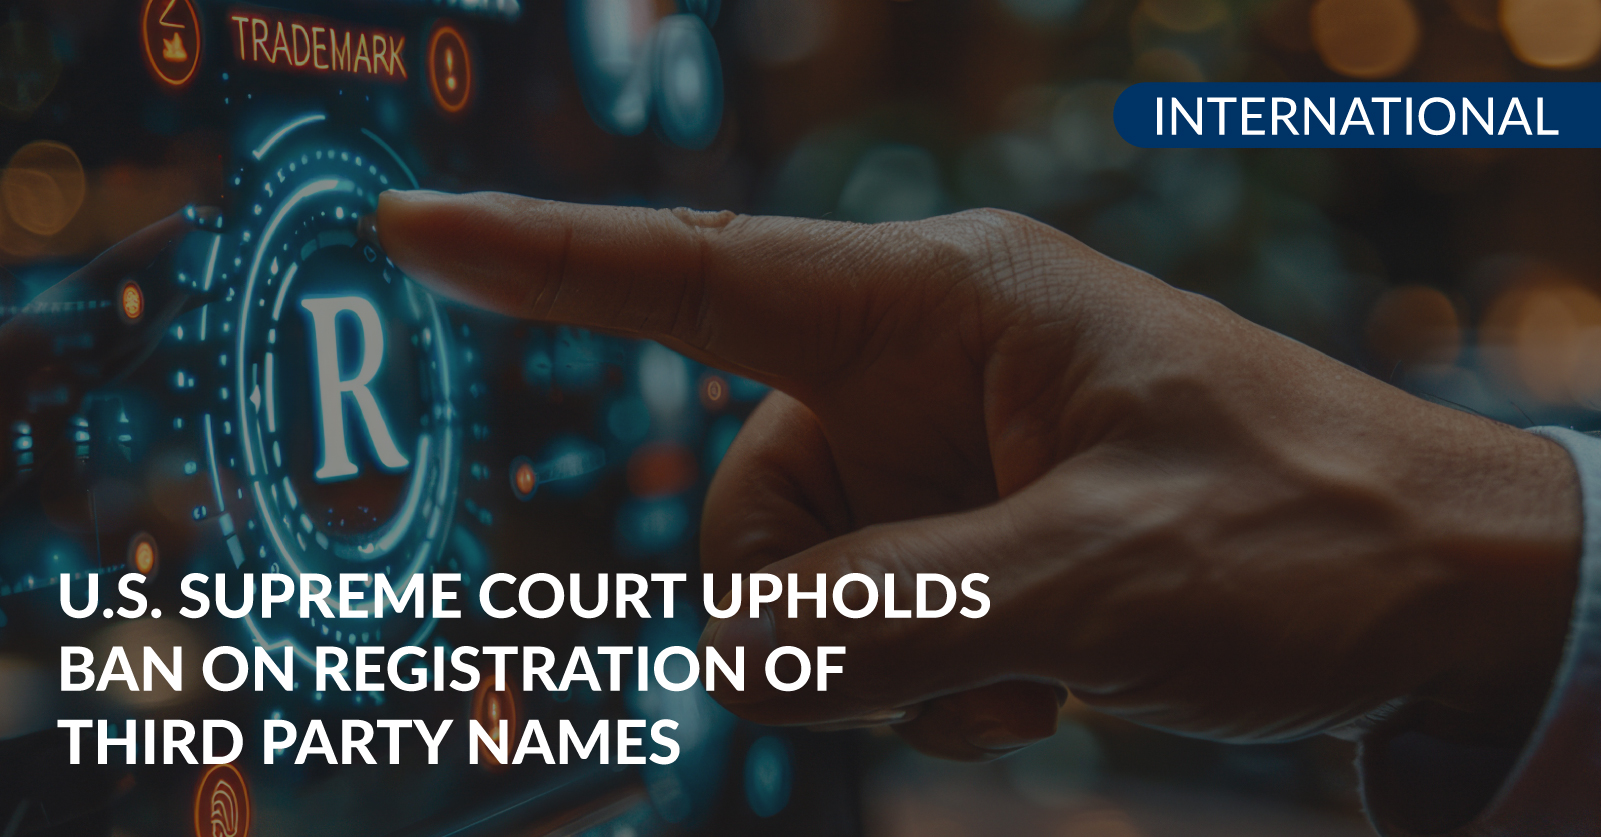 registration of third party names